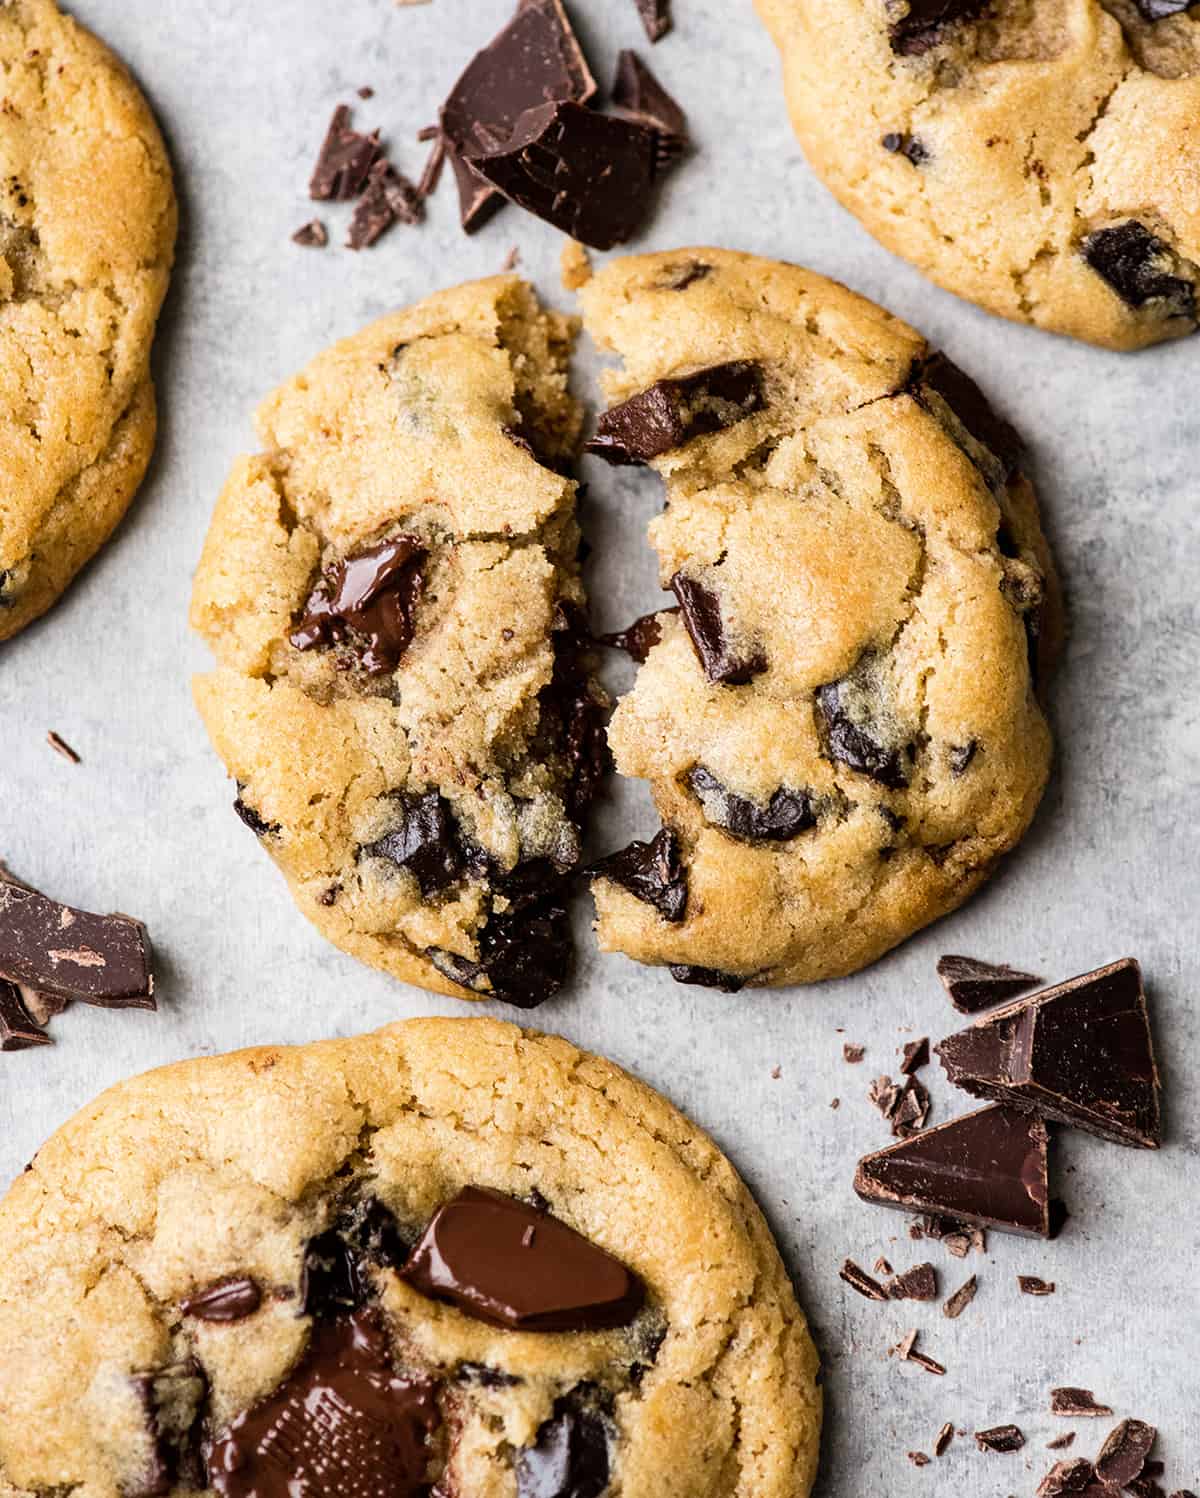 Overhead view of one chocolate chip cookie torn in half with melty chocolate chips surrounded by three other cookies and chopped chocolate